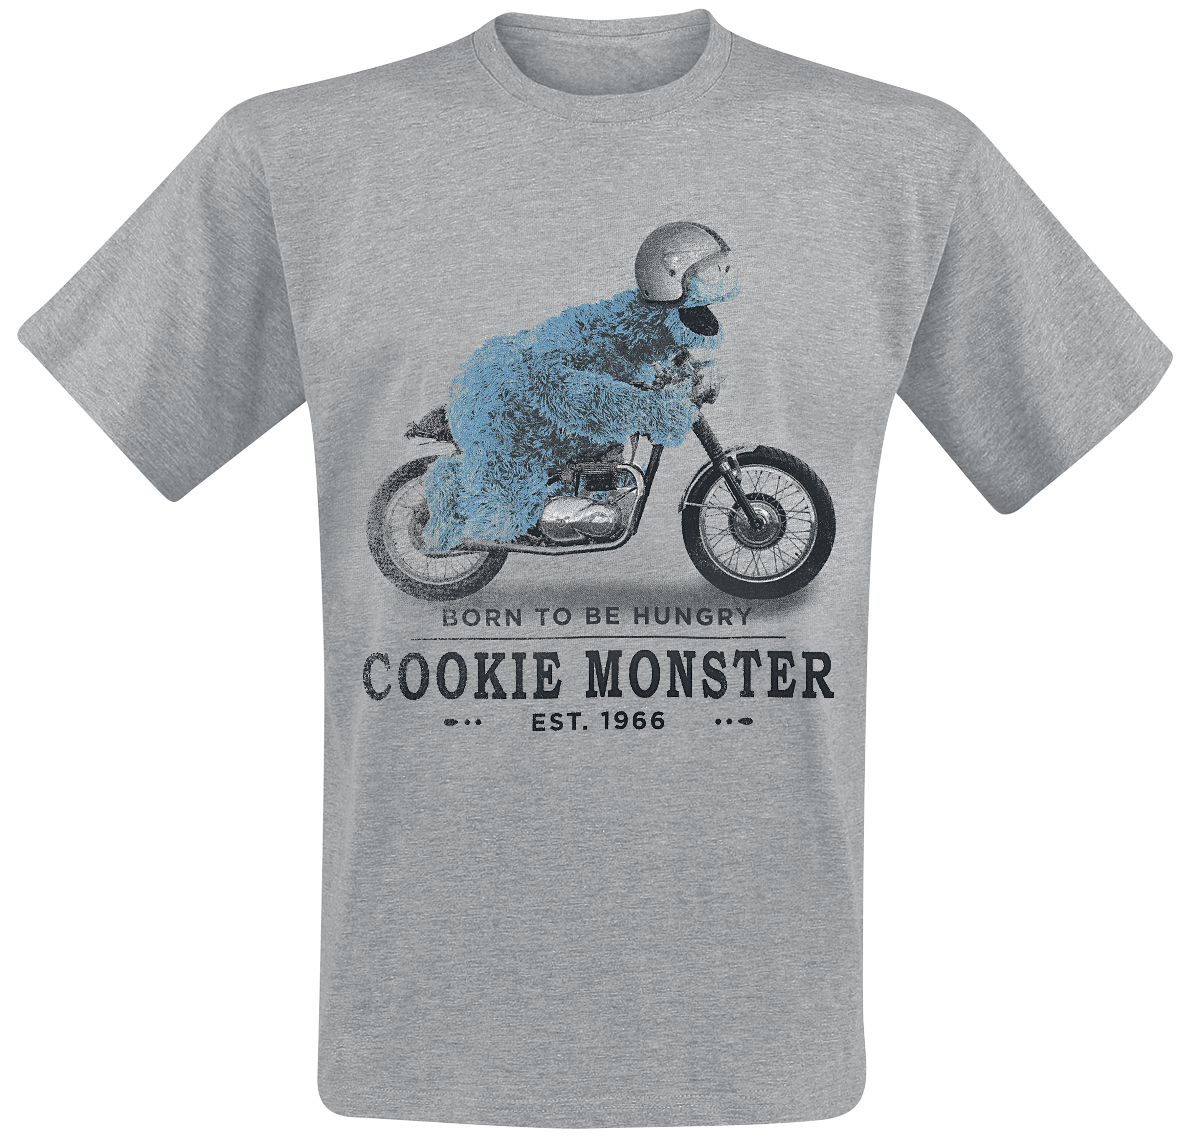 Sesame Street - Cookie Monster - Born To Be Hungry - T-Shirt - mottled grey image